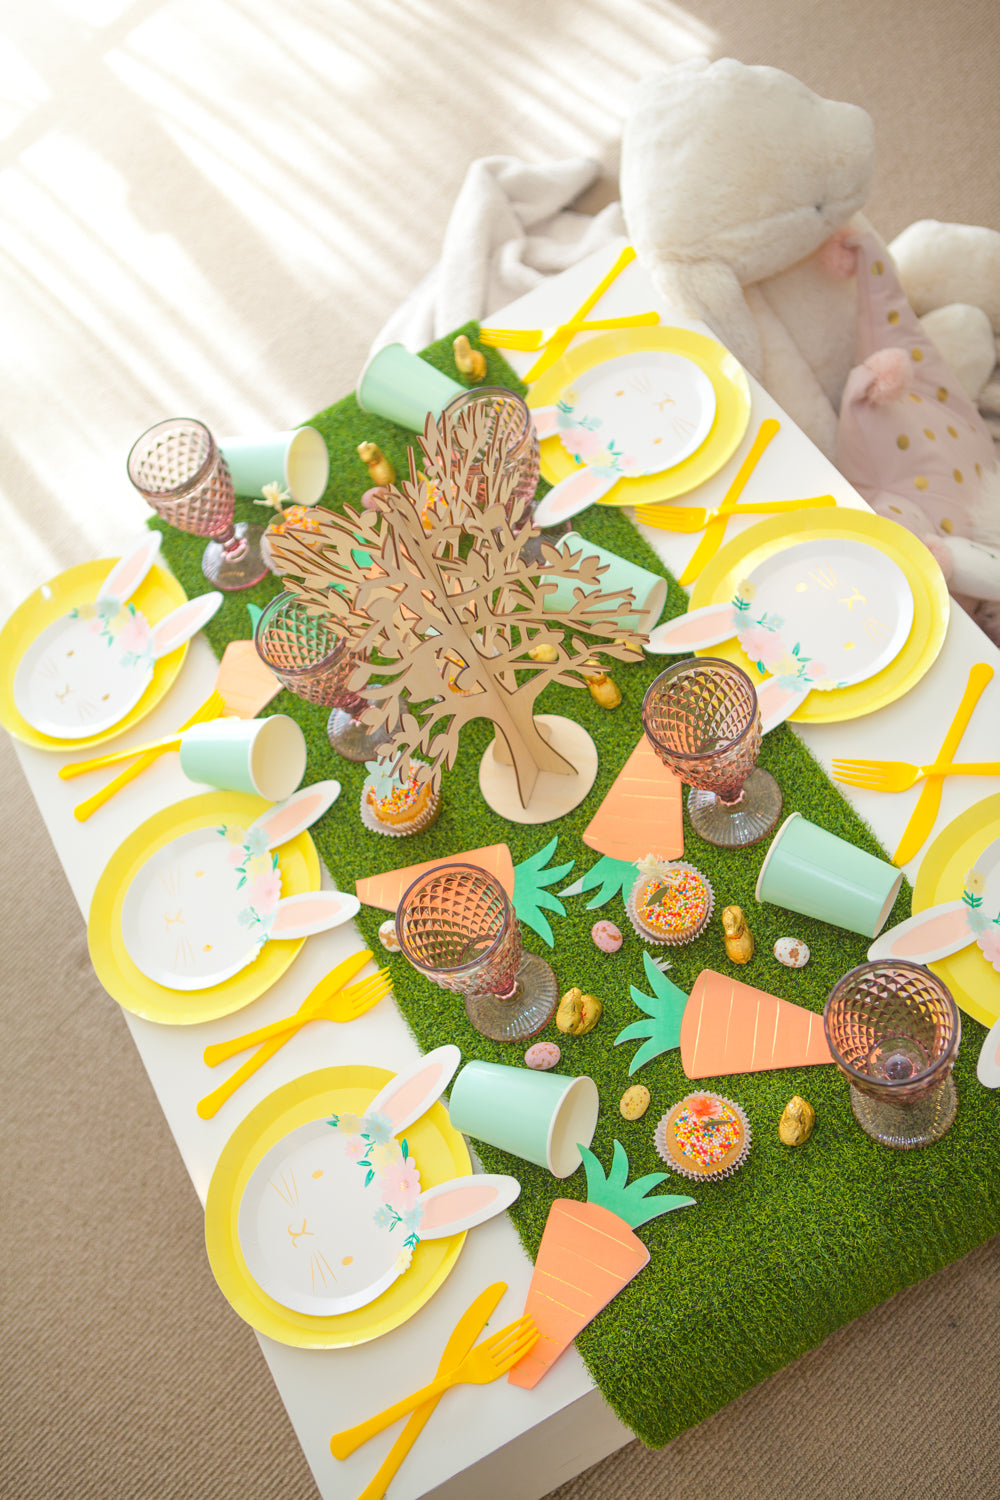 Adding table runner on your party table can easily create a beautiful look for your party. we provide different types of table runner to meet your need, including grass table runner for tea party/Easter party, or paper table runner for any kind of party. 